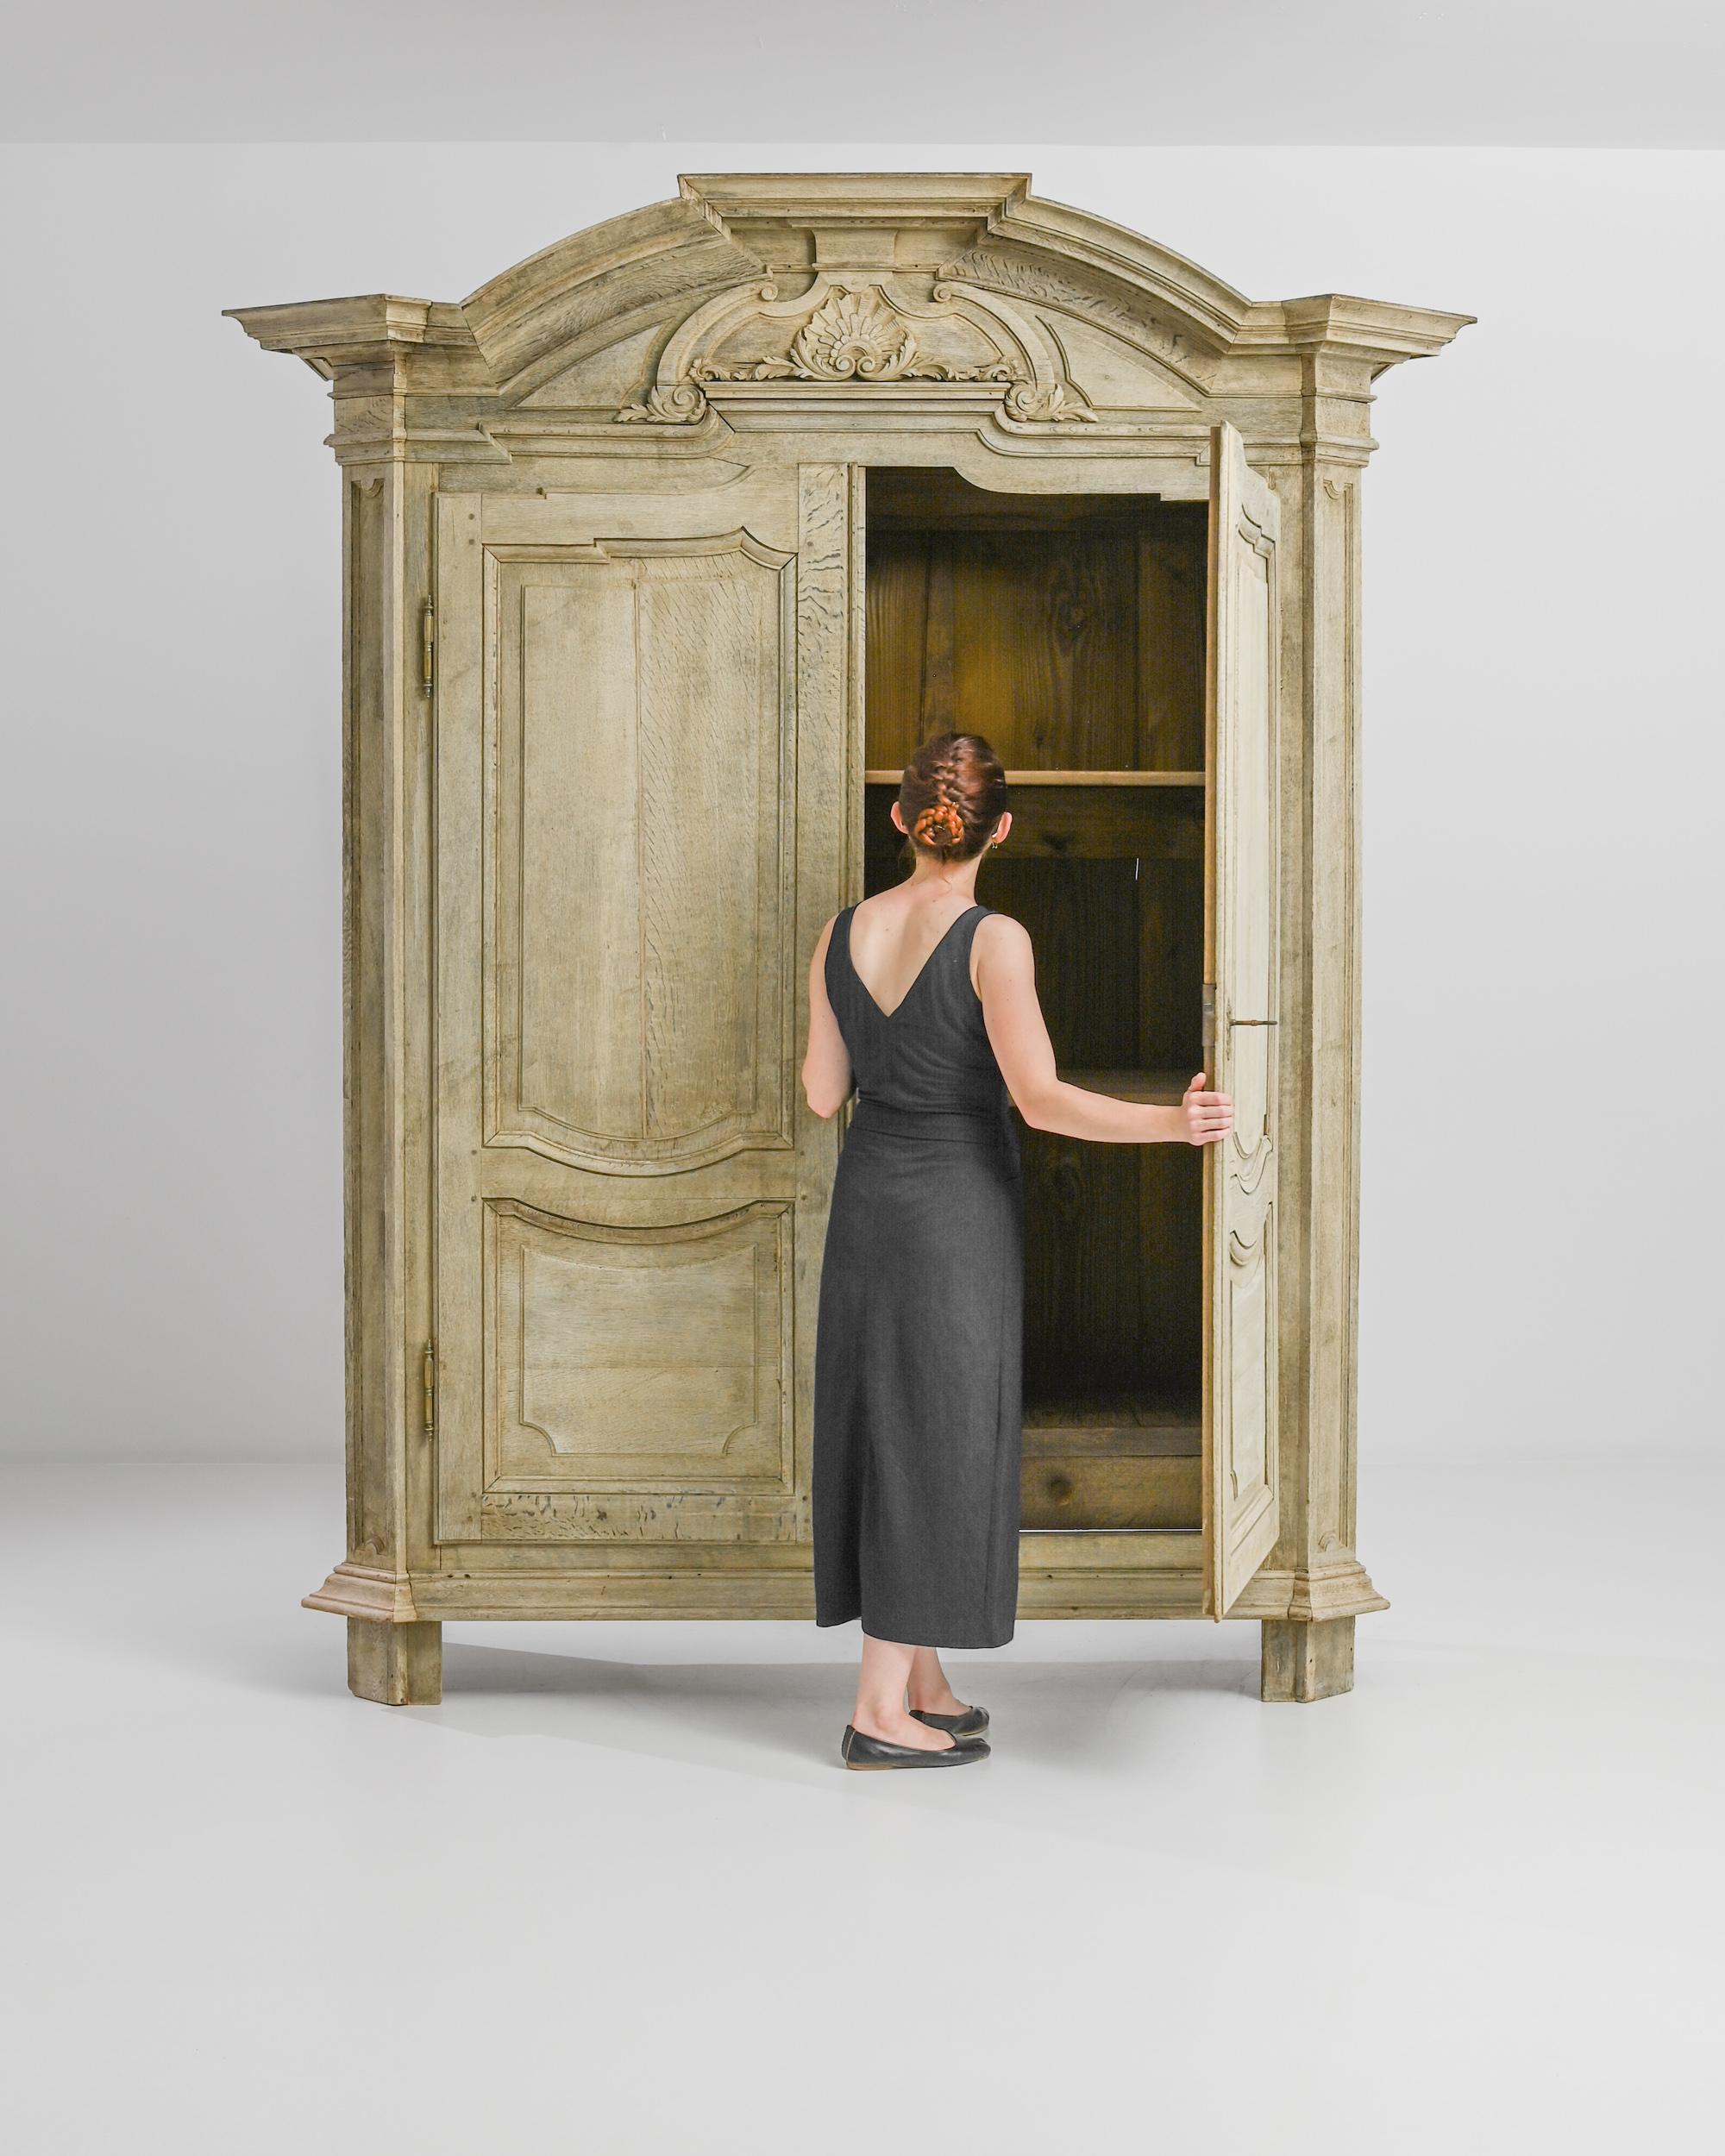 Hand-crafted in the 19th century, this French wooden cabinet is impressive in stature and blends antique charm with unparalleled craftsmanship. This cabinet displays two doors with wide open space for shelves, as well as two small drawers inside at